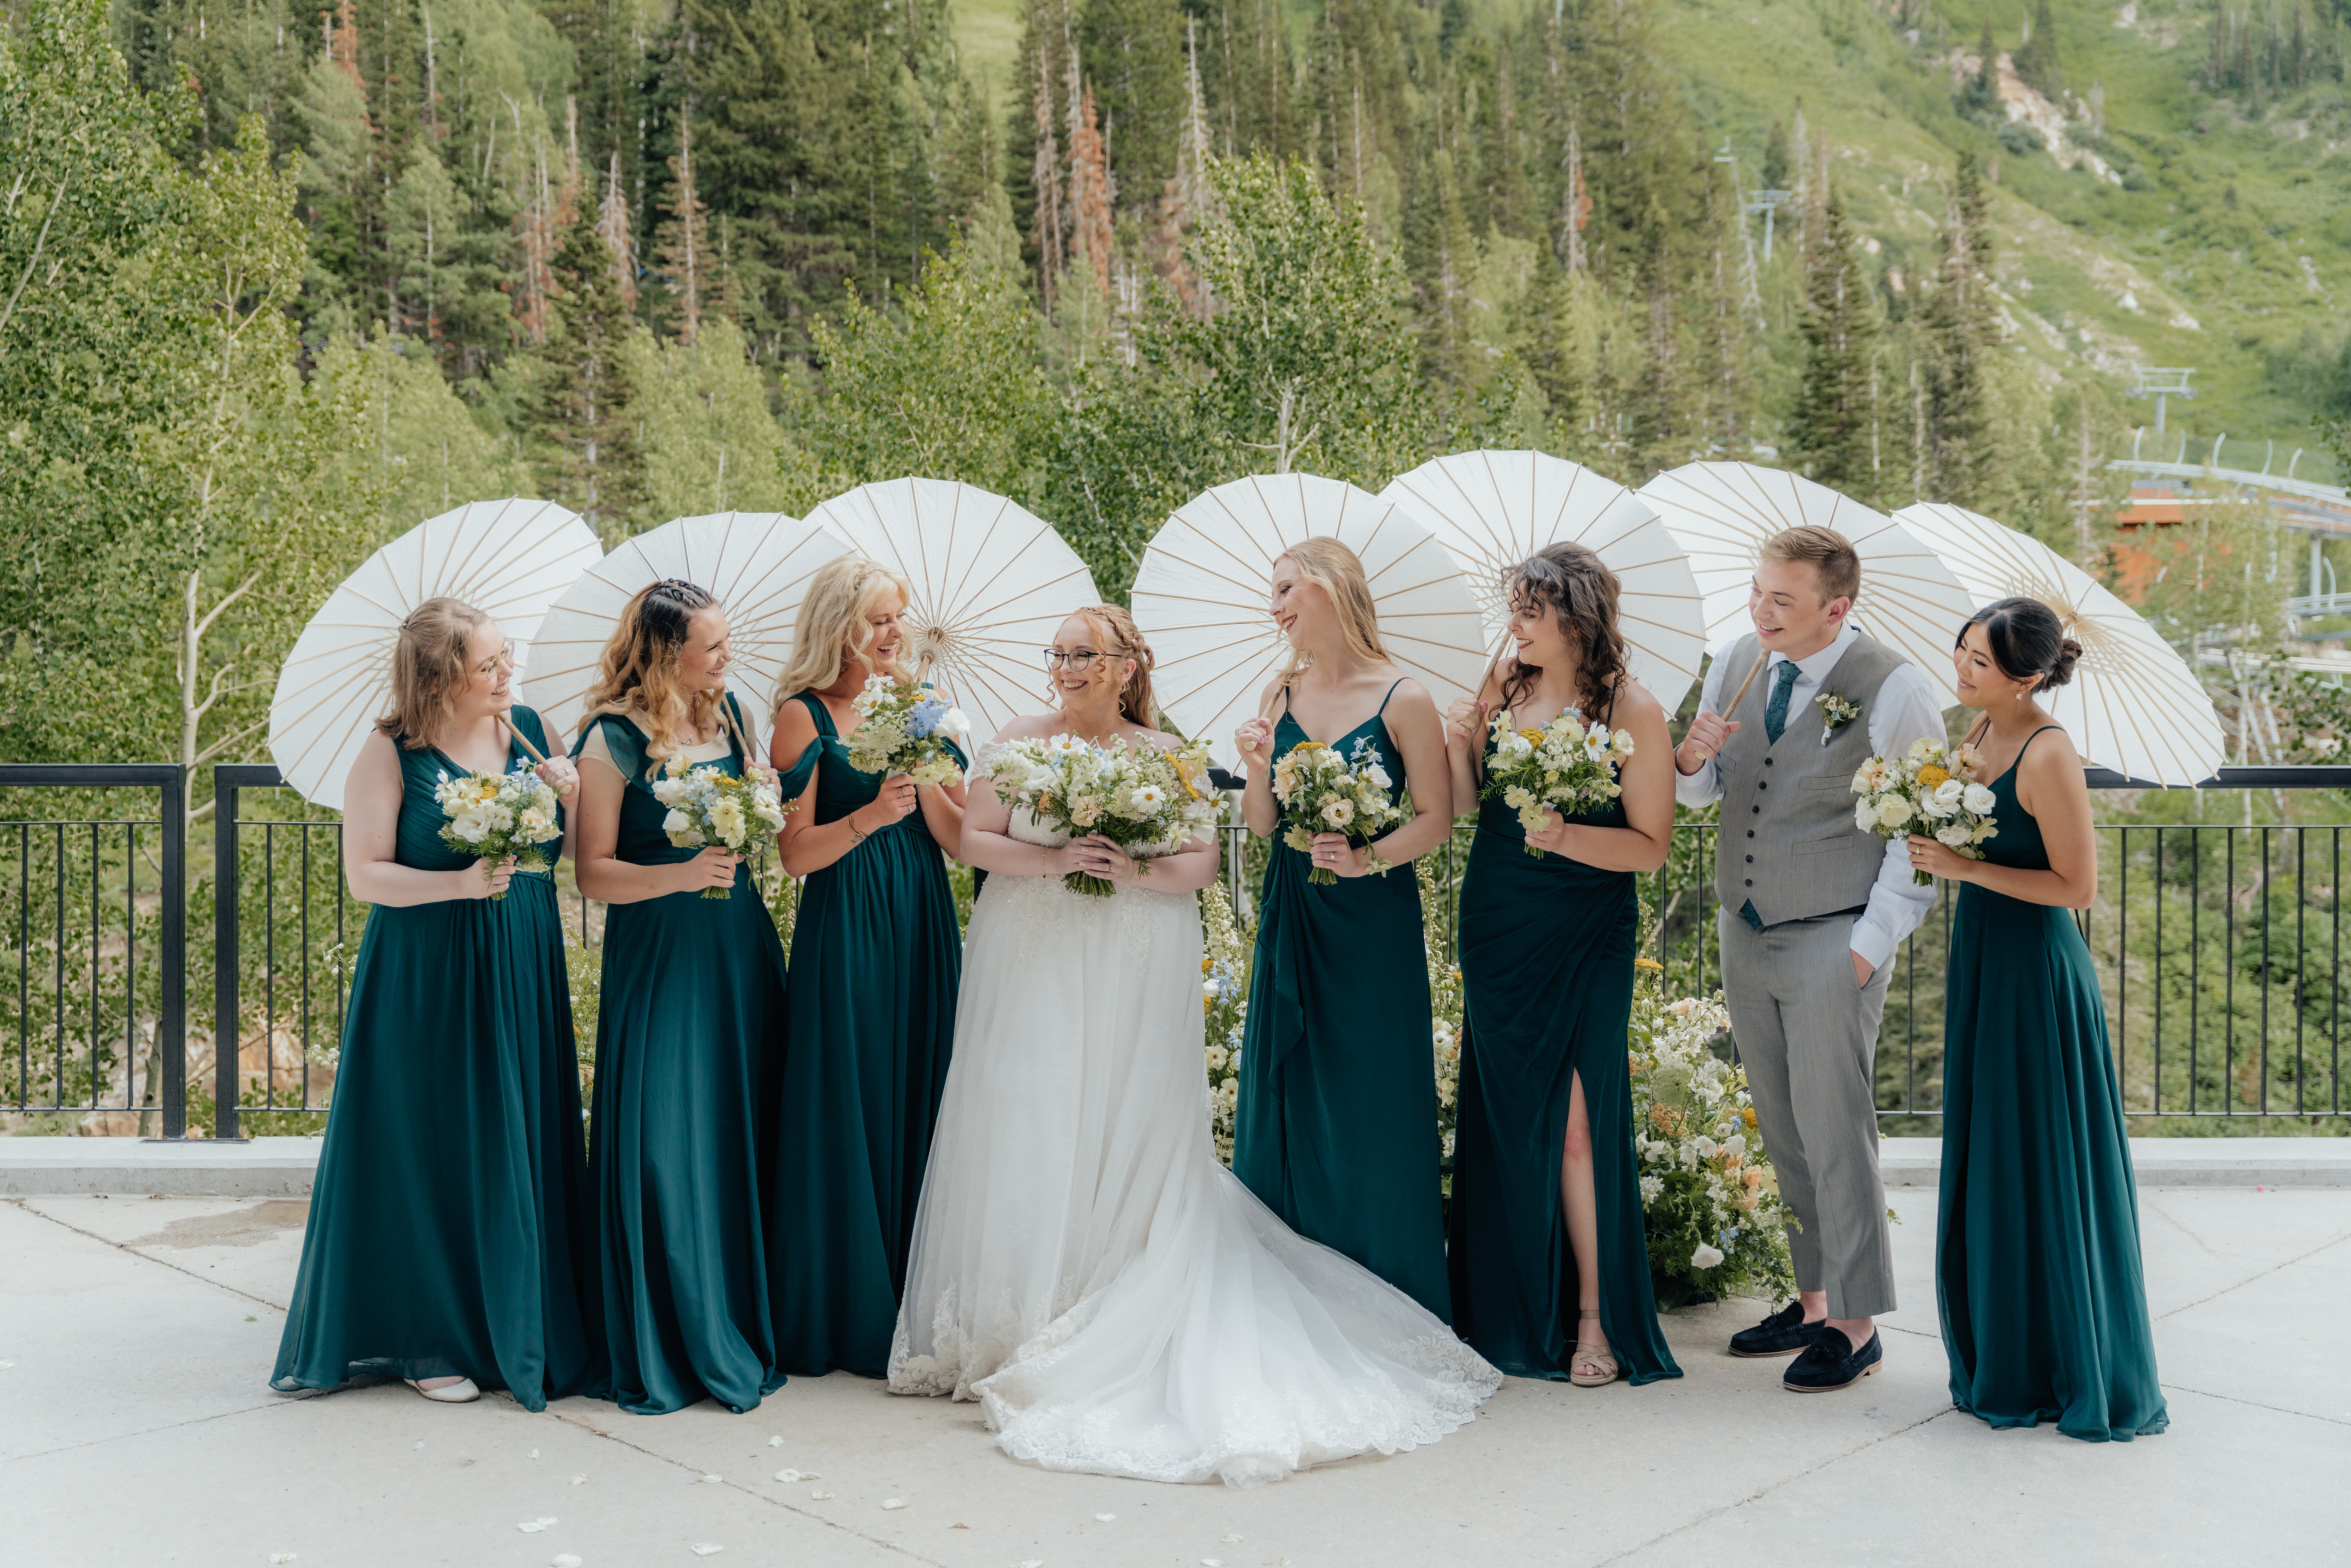 A wedding party of girls in deep green dresses holding white parasols and wildflower wedding bouquets, smile for the camera while standing in front of a nest of wildflowers and mountain trees as their backdrop.